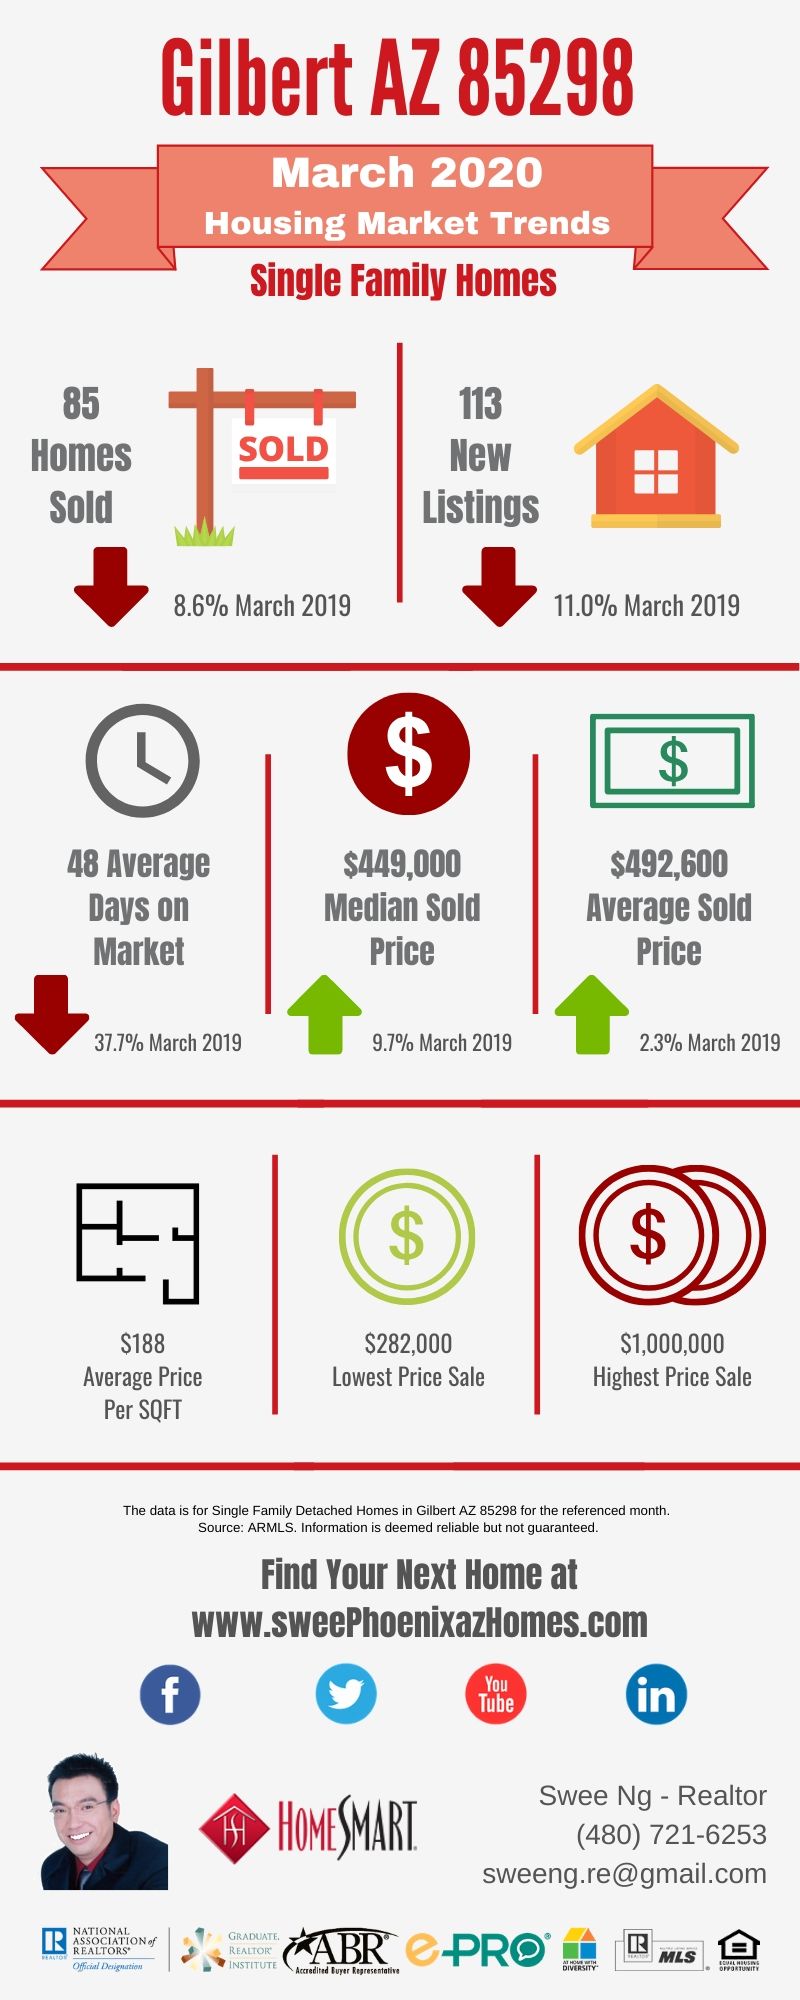 Gilbert AZ 85298 Housing Market Trends Report March 2020 by Swee Ng, Real Estate and House Value